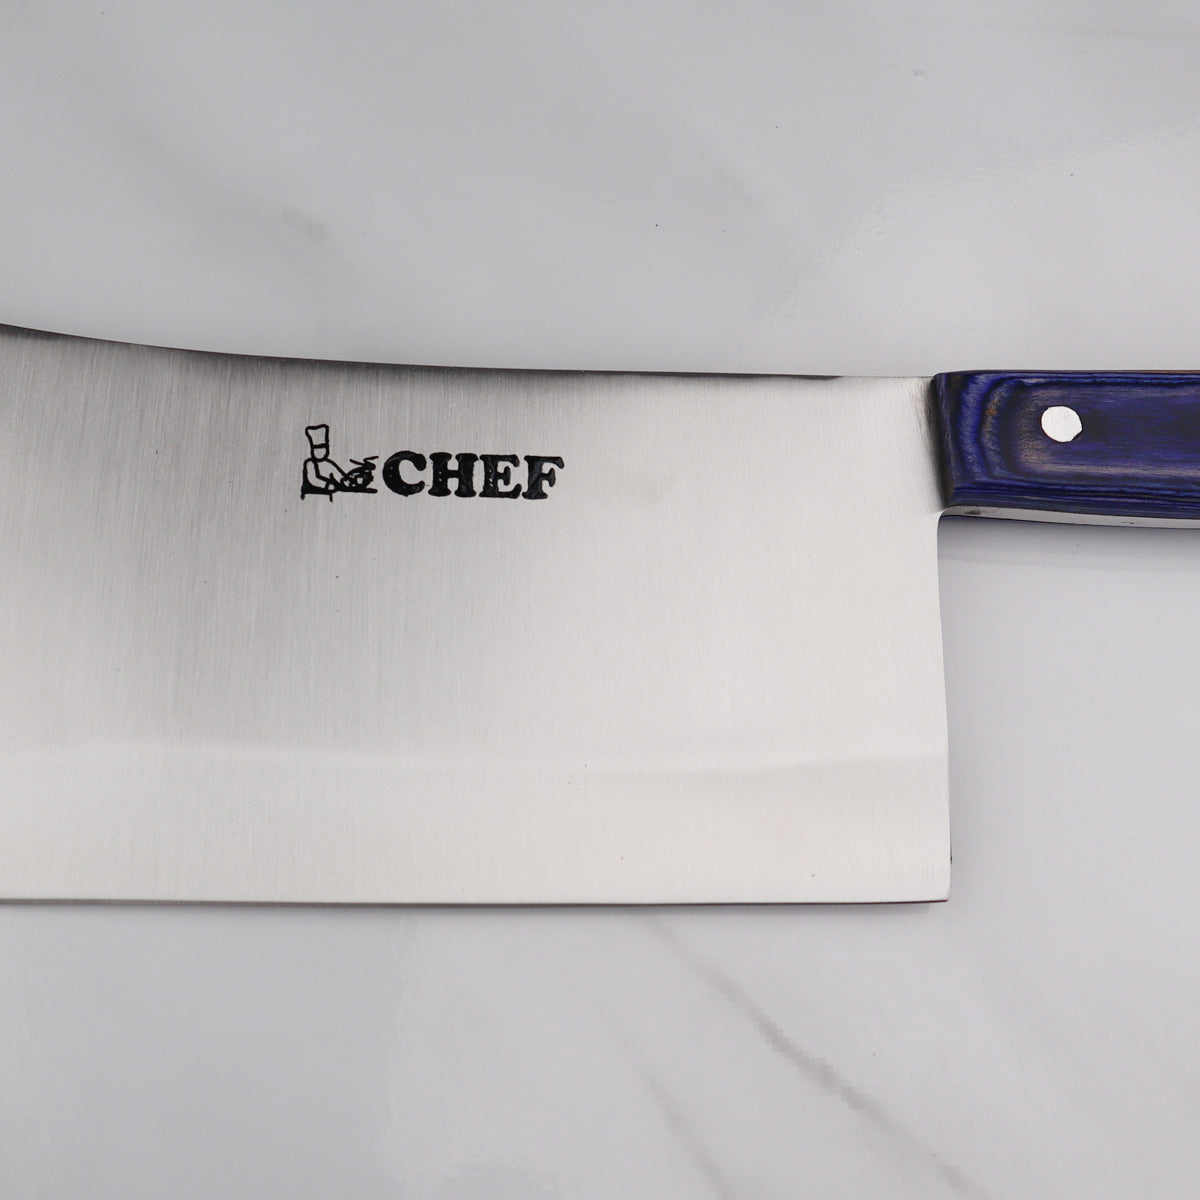 CHEF High Quality Stainless Steel Meat Chopper / Tokka Blue MC Handle - 29.5cm Large Blade